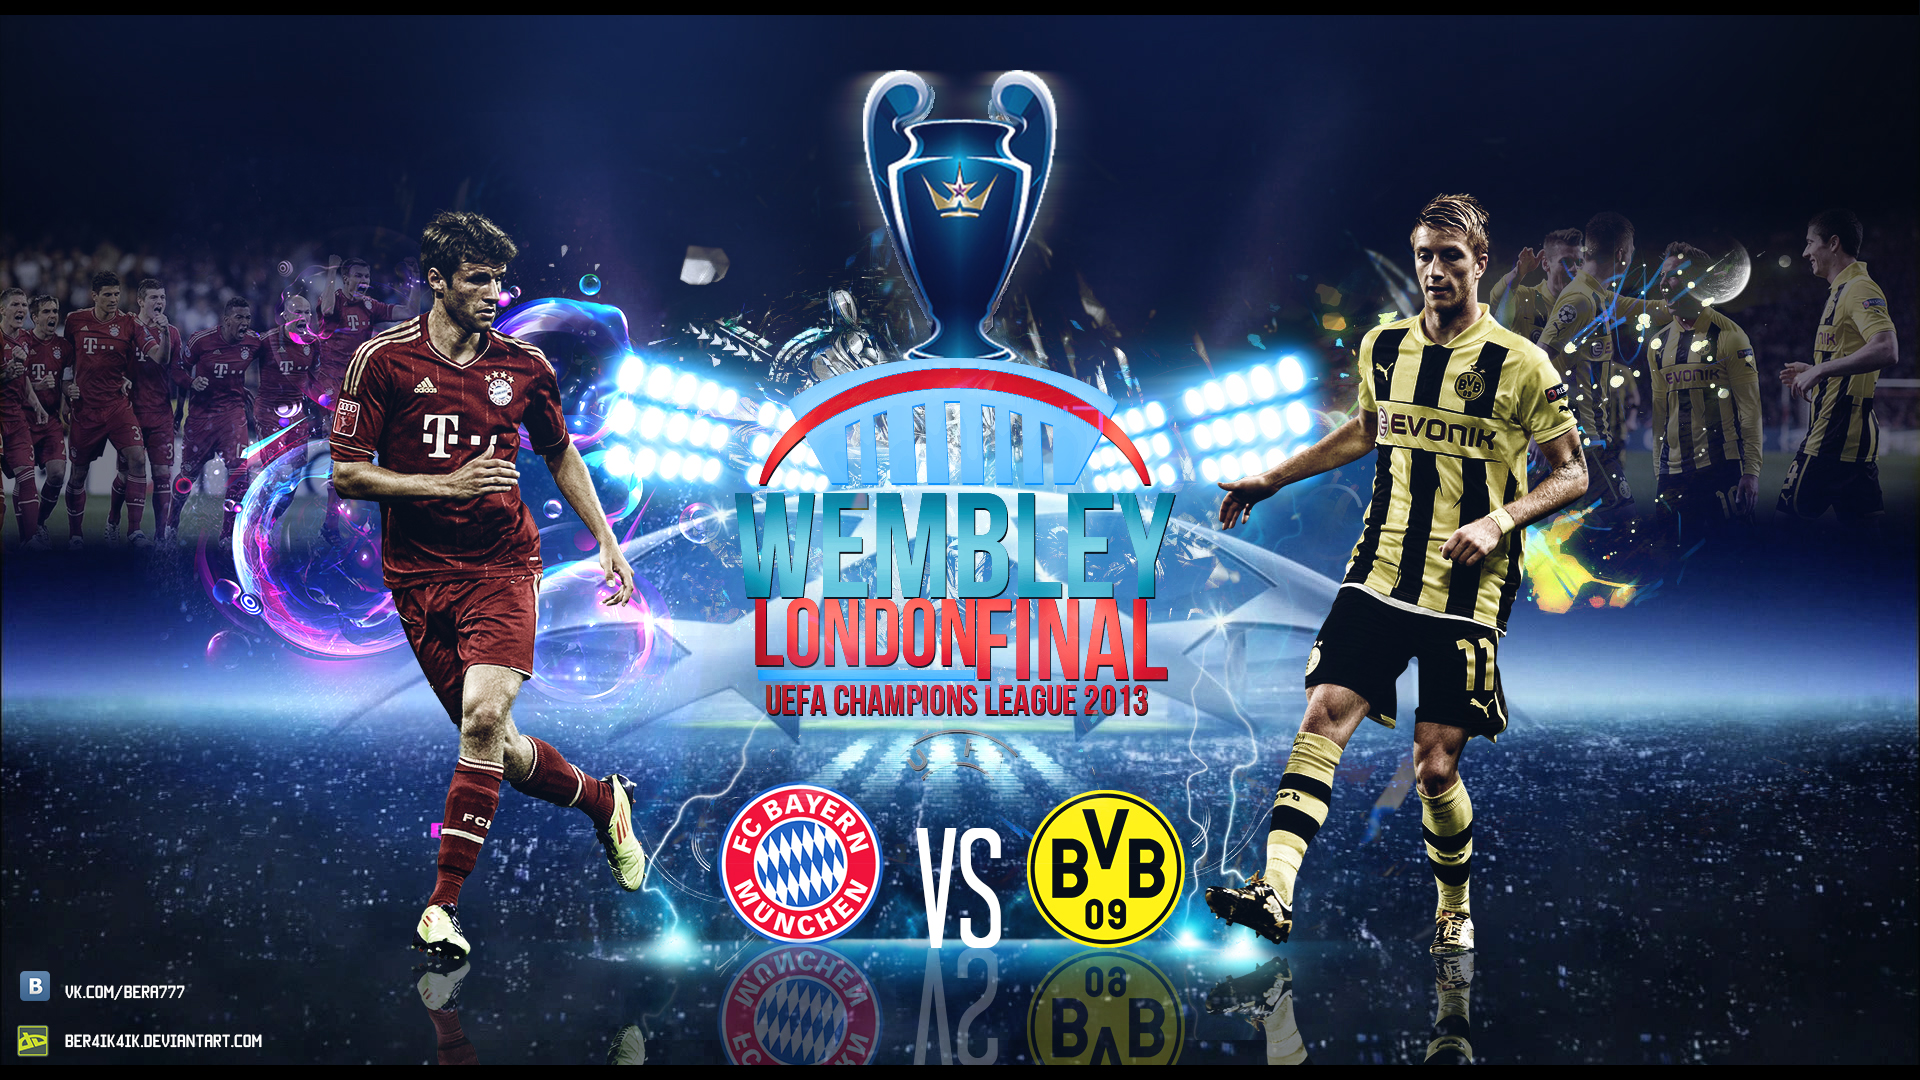 Download this Chandions League Final Dortmund Bayern Nchen picture